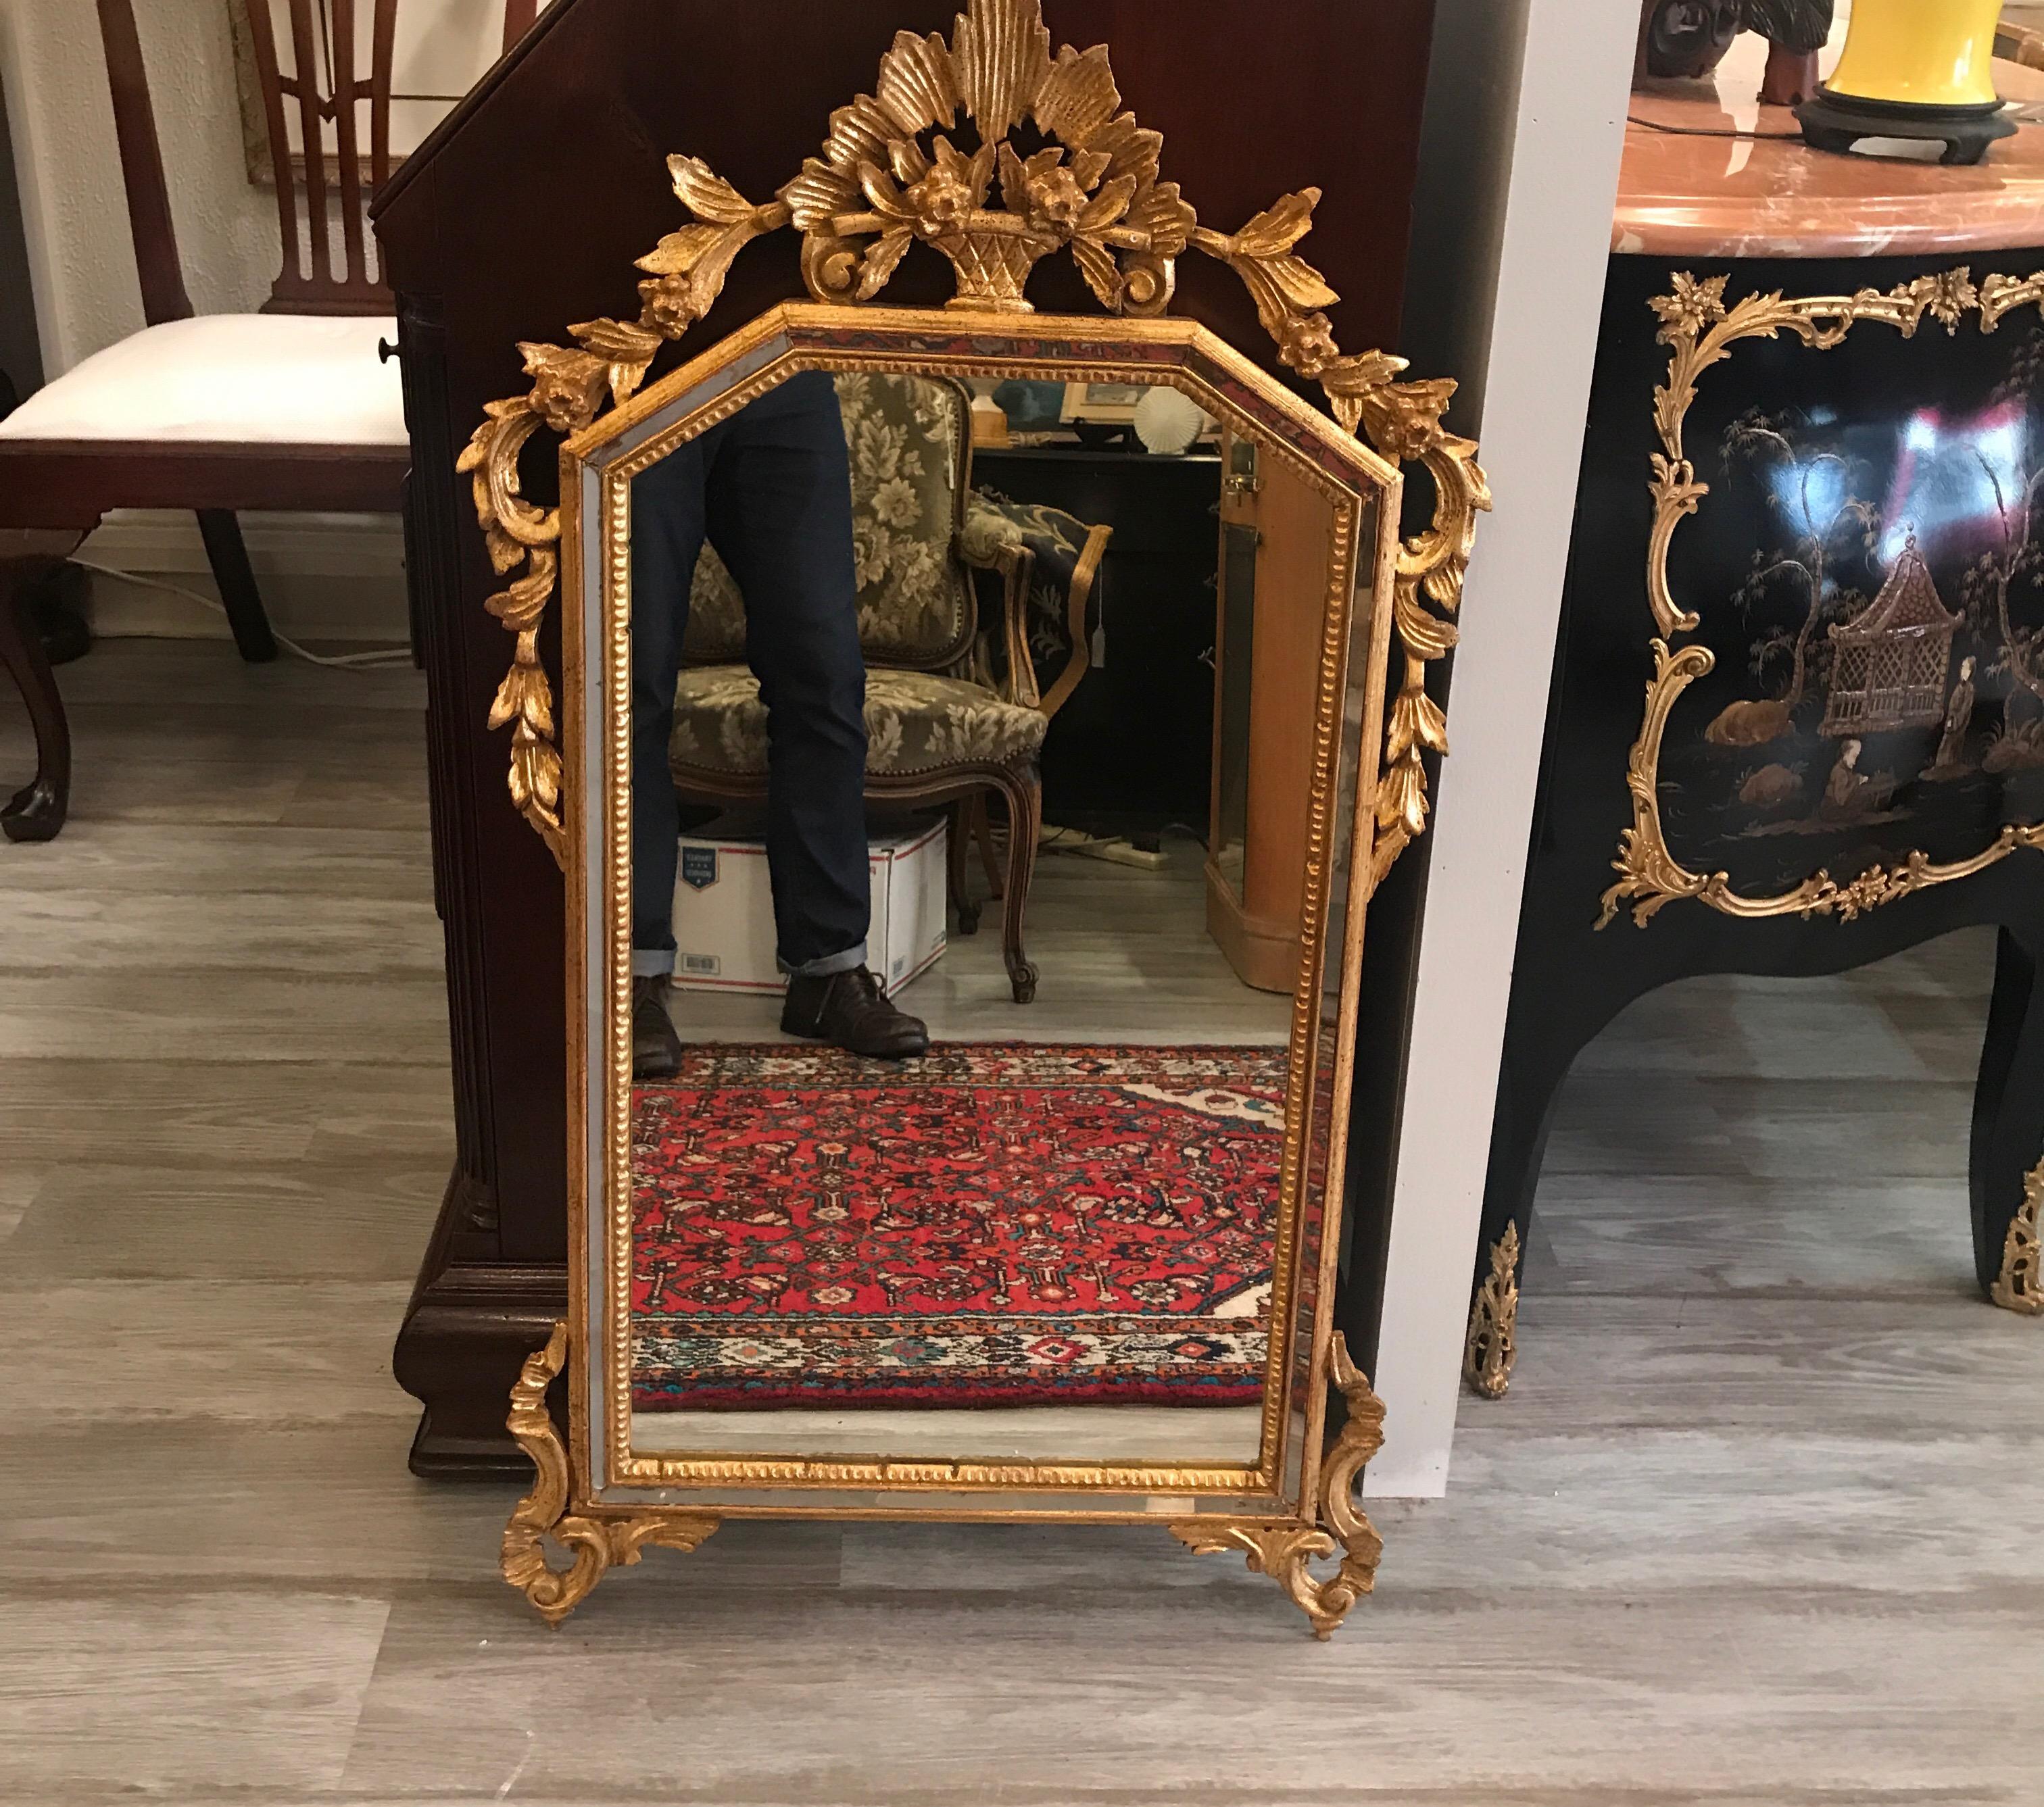 A Louis XV style giltwood mirror with elaborate frame. The intricate pediment with leafy scrolls down the sides with a sliver of mirror inset to the frame. Classically beautiful. The shipping calculator is incorrect, we can have this properly boxed